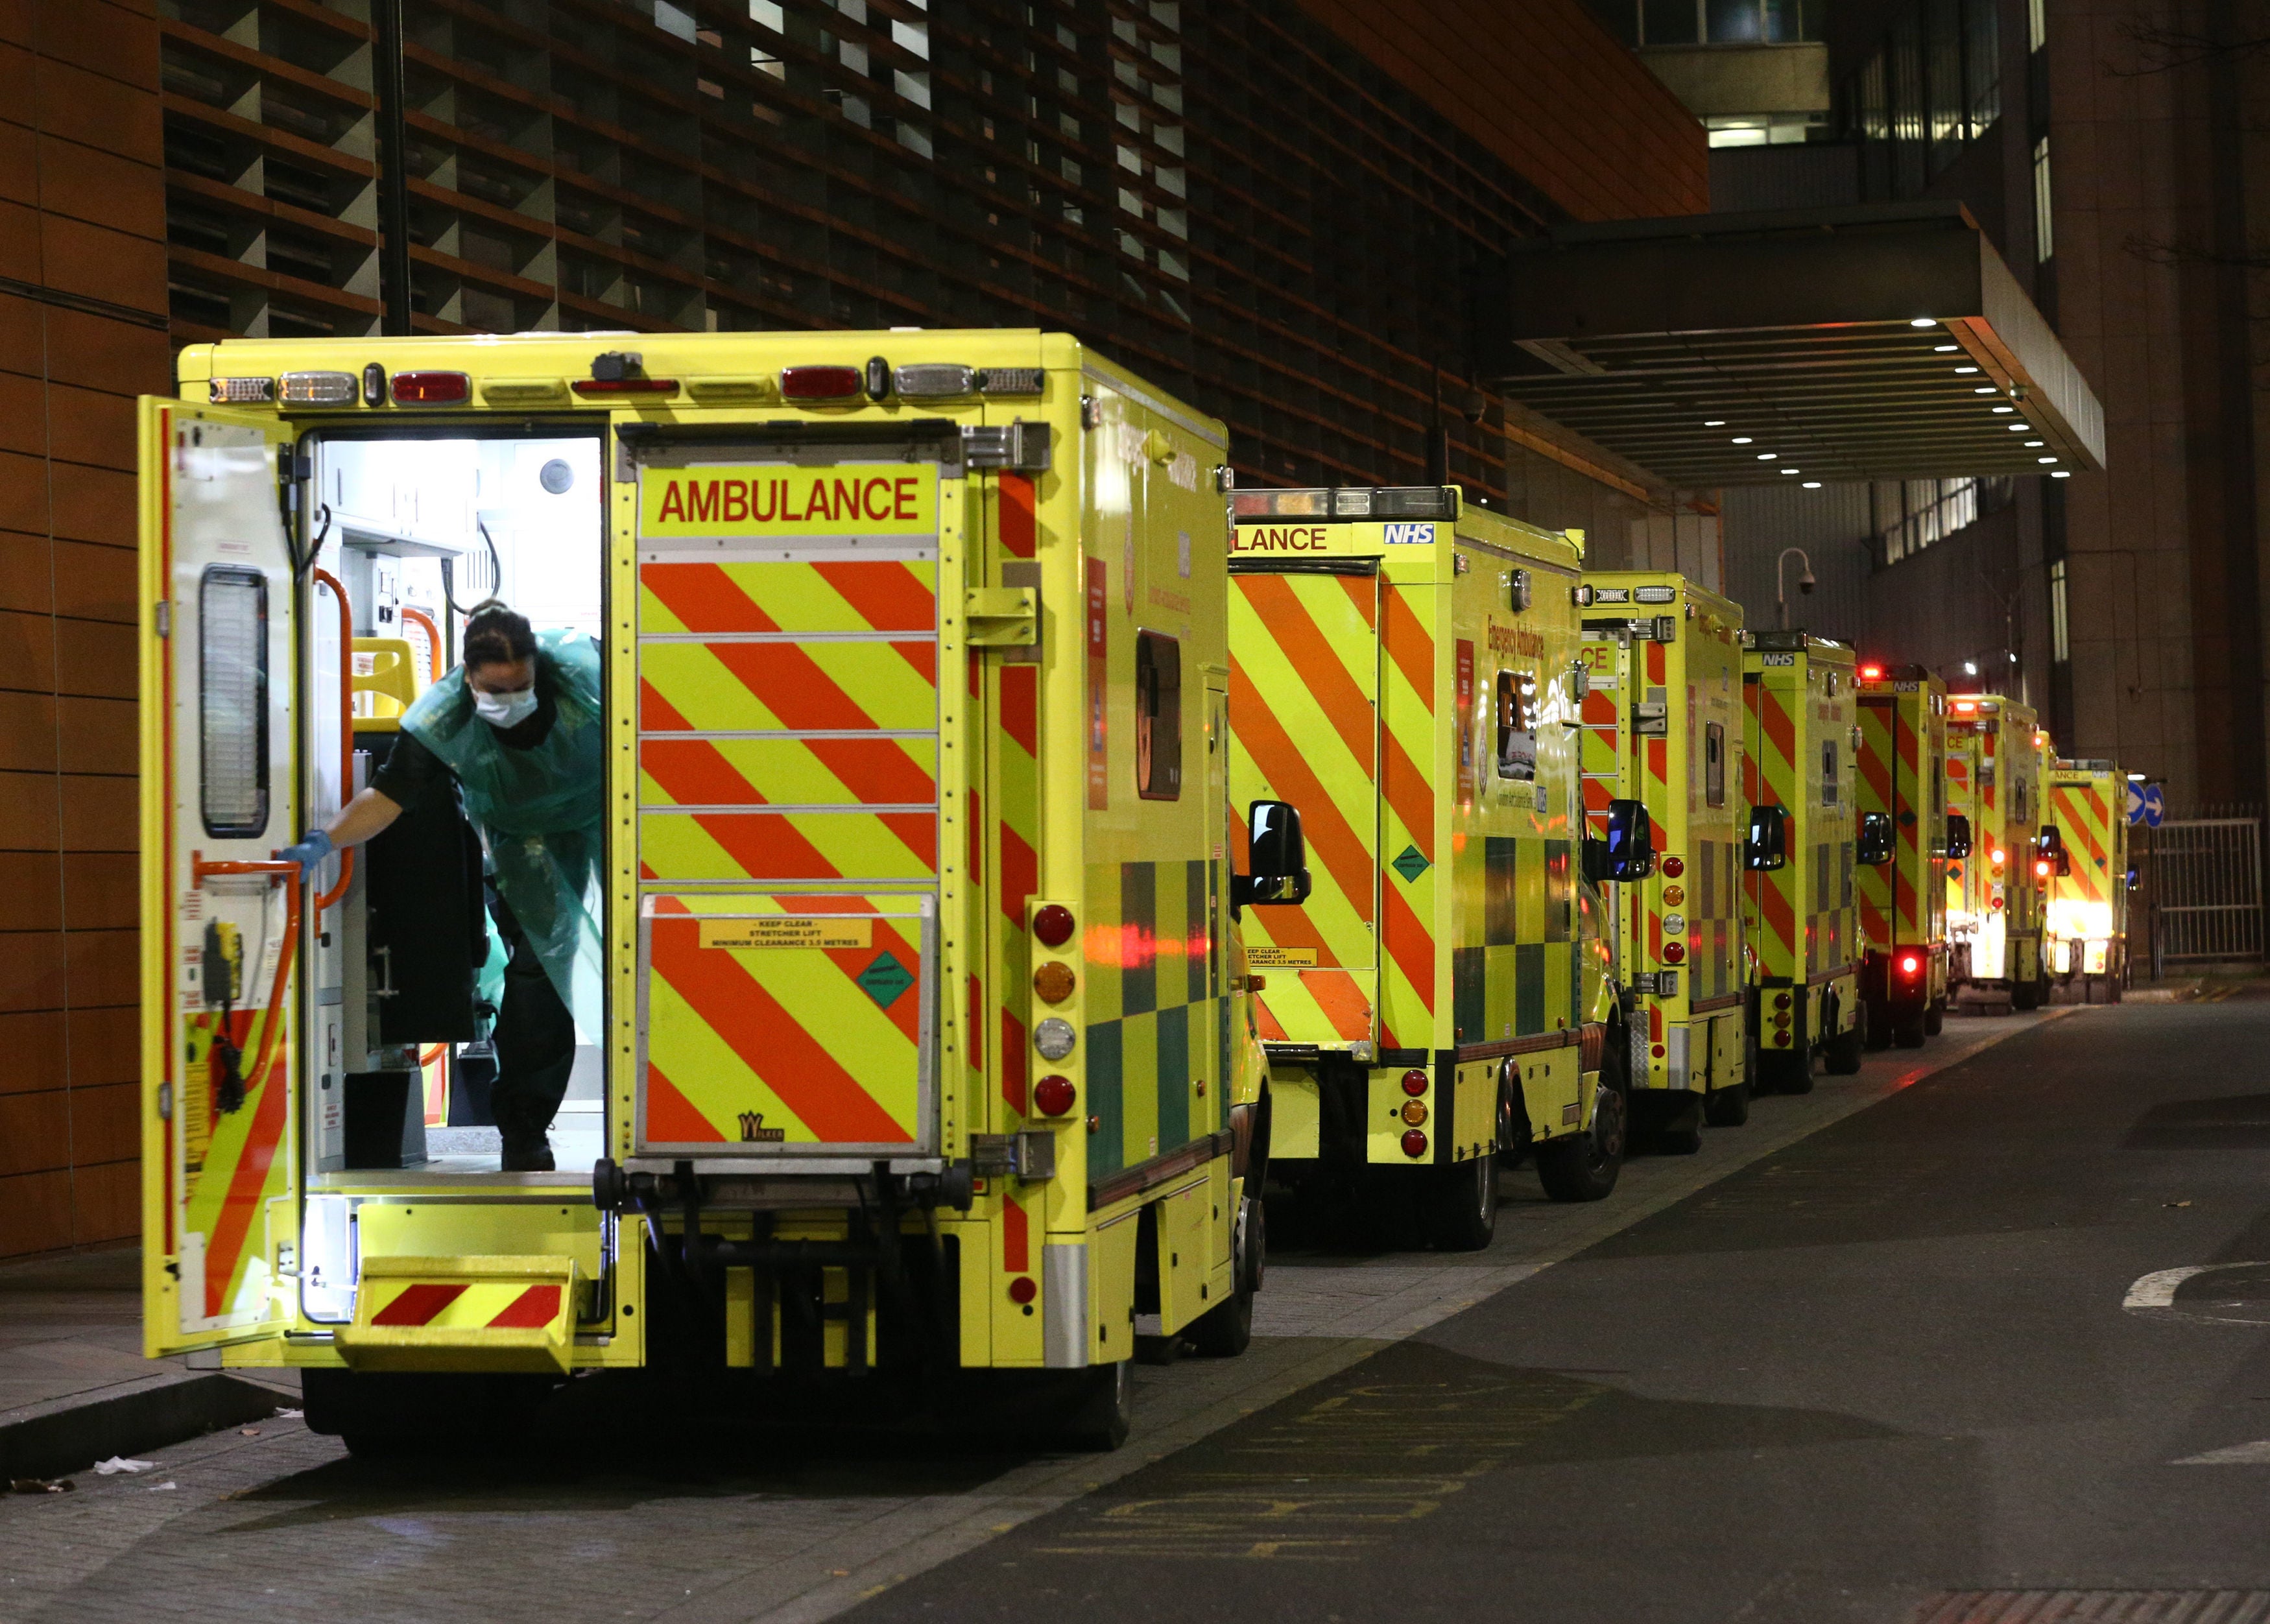 Officers are regularly being sent to ambulance calls to make up for delays